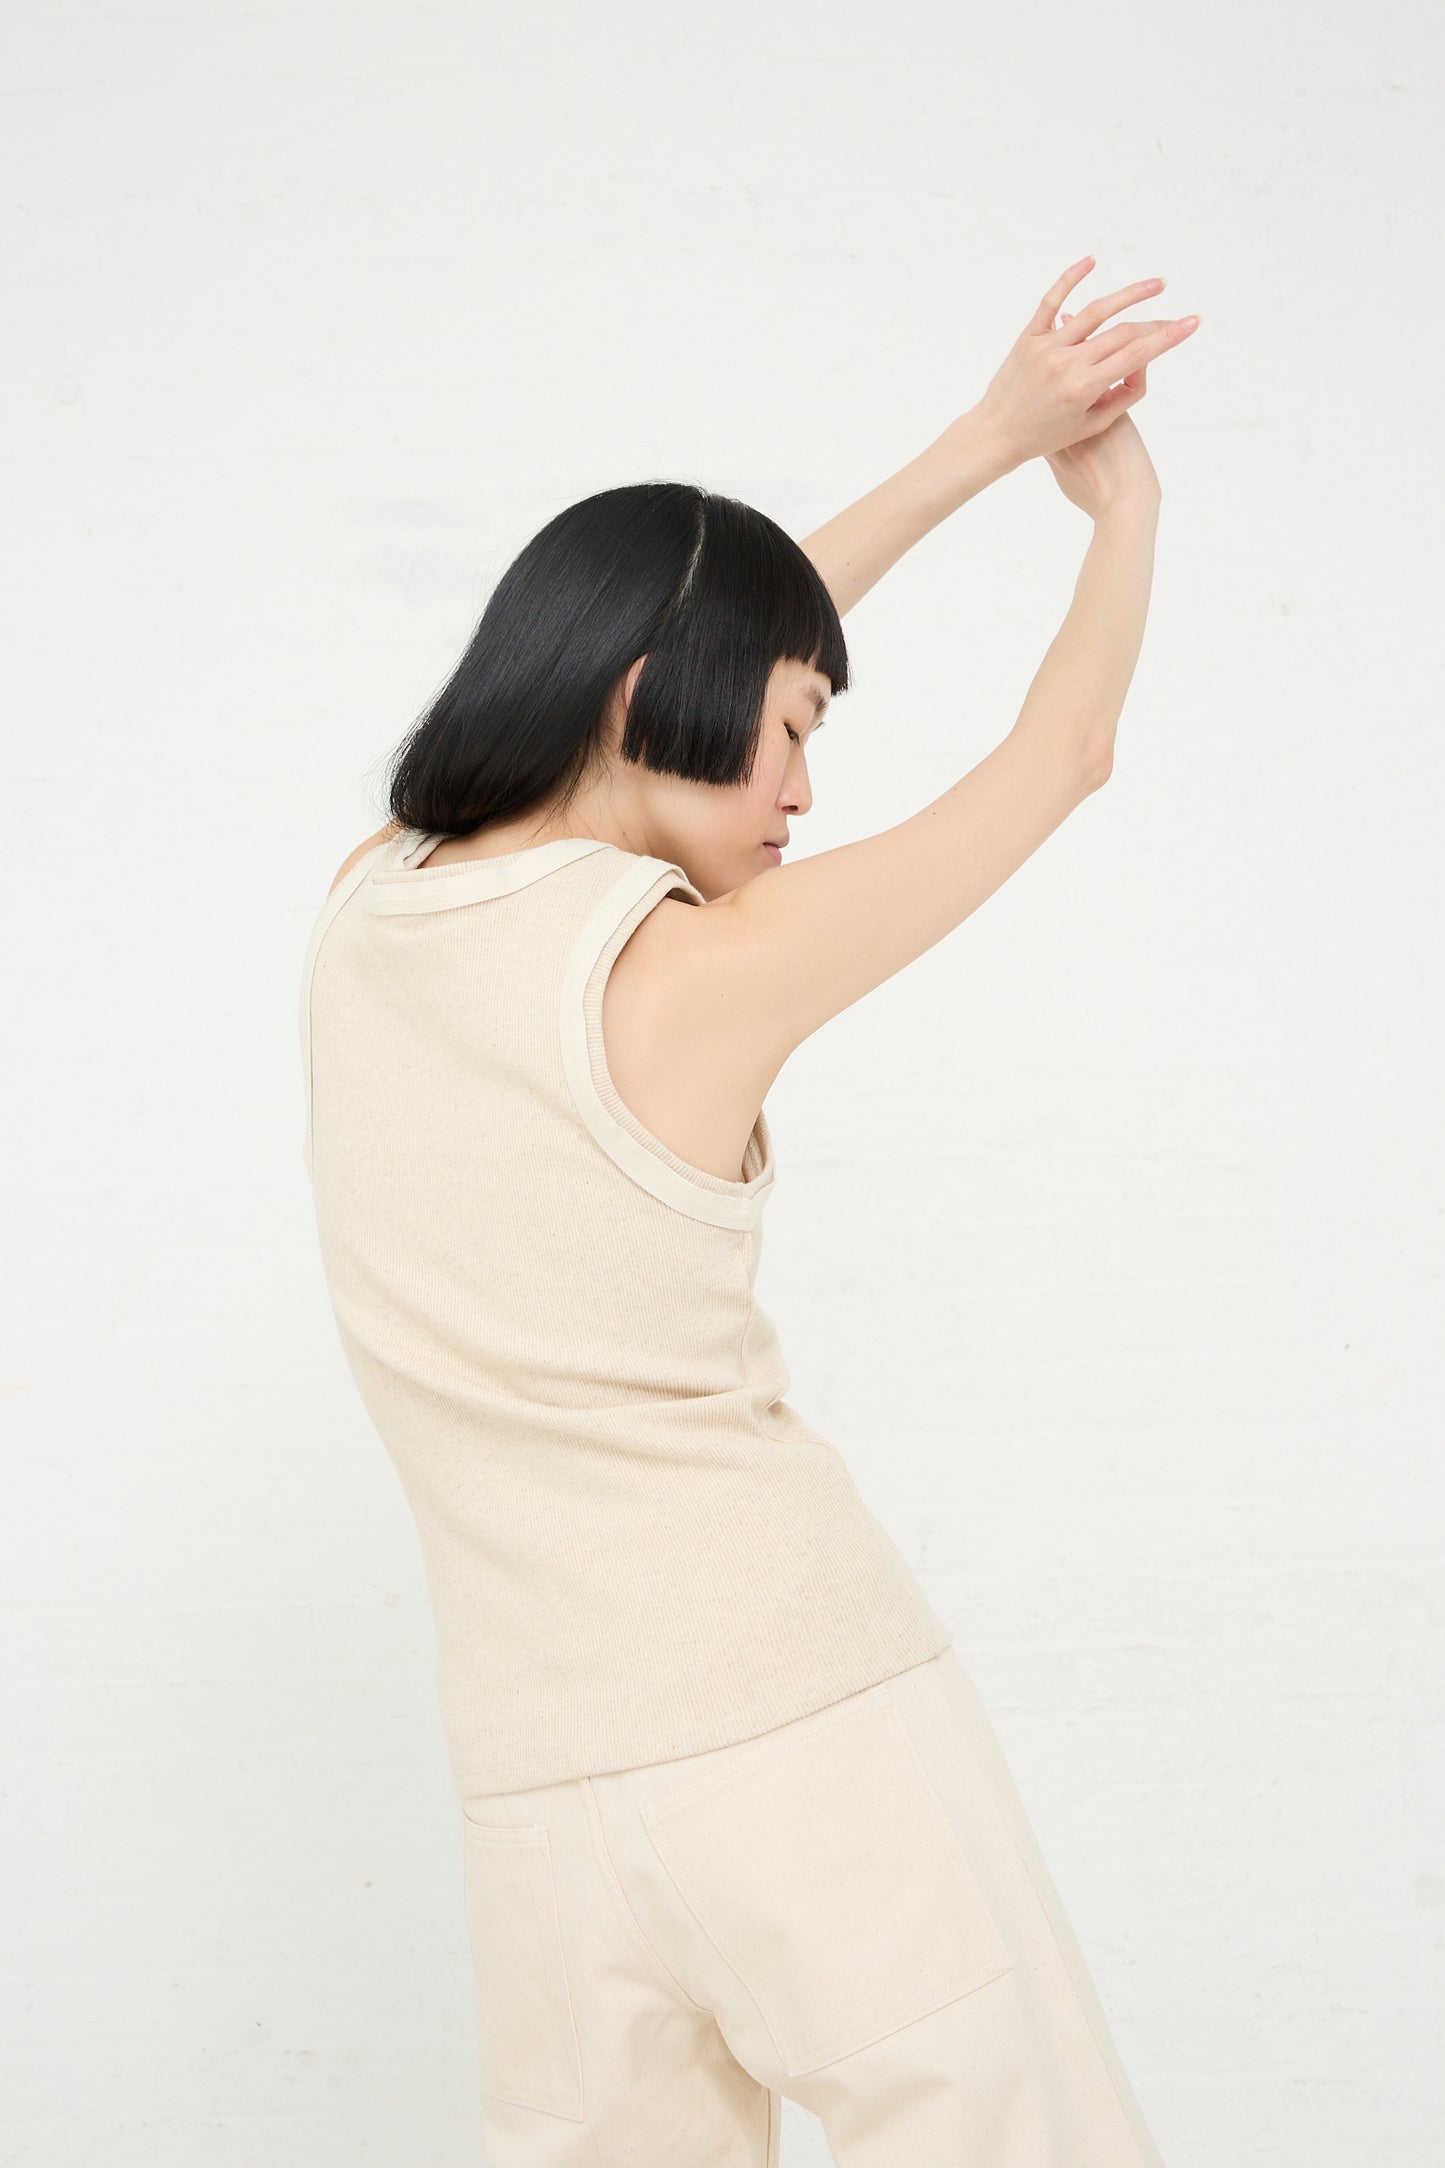 A woman with short dark hair dressed in a Organic Cotton Hemp Rib Supple Tank in Undyed from Baserange performs a dance move against a white background.